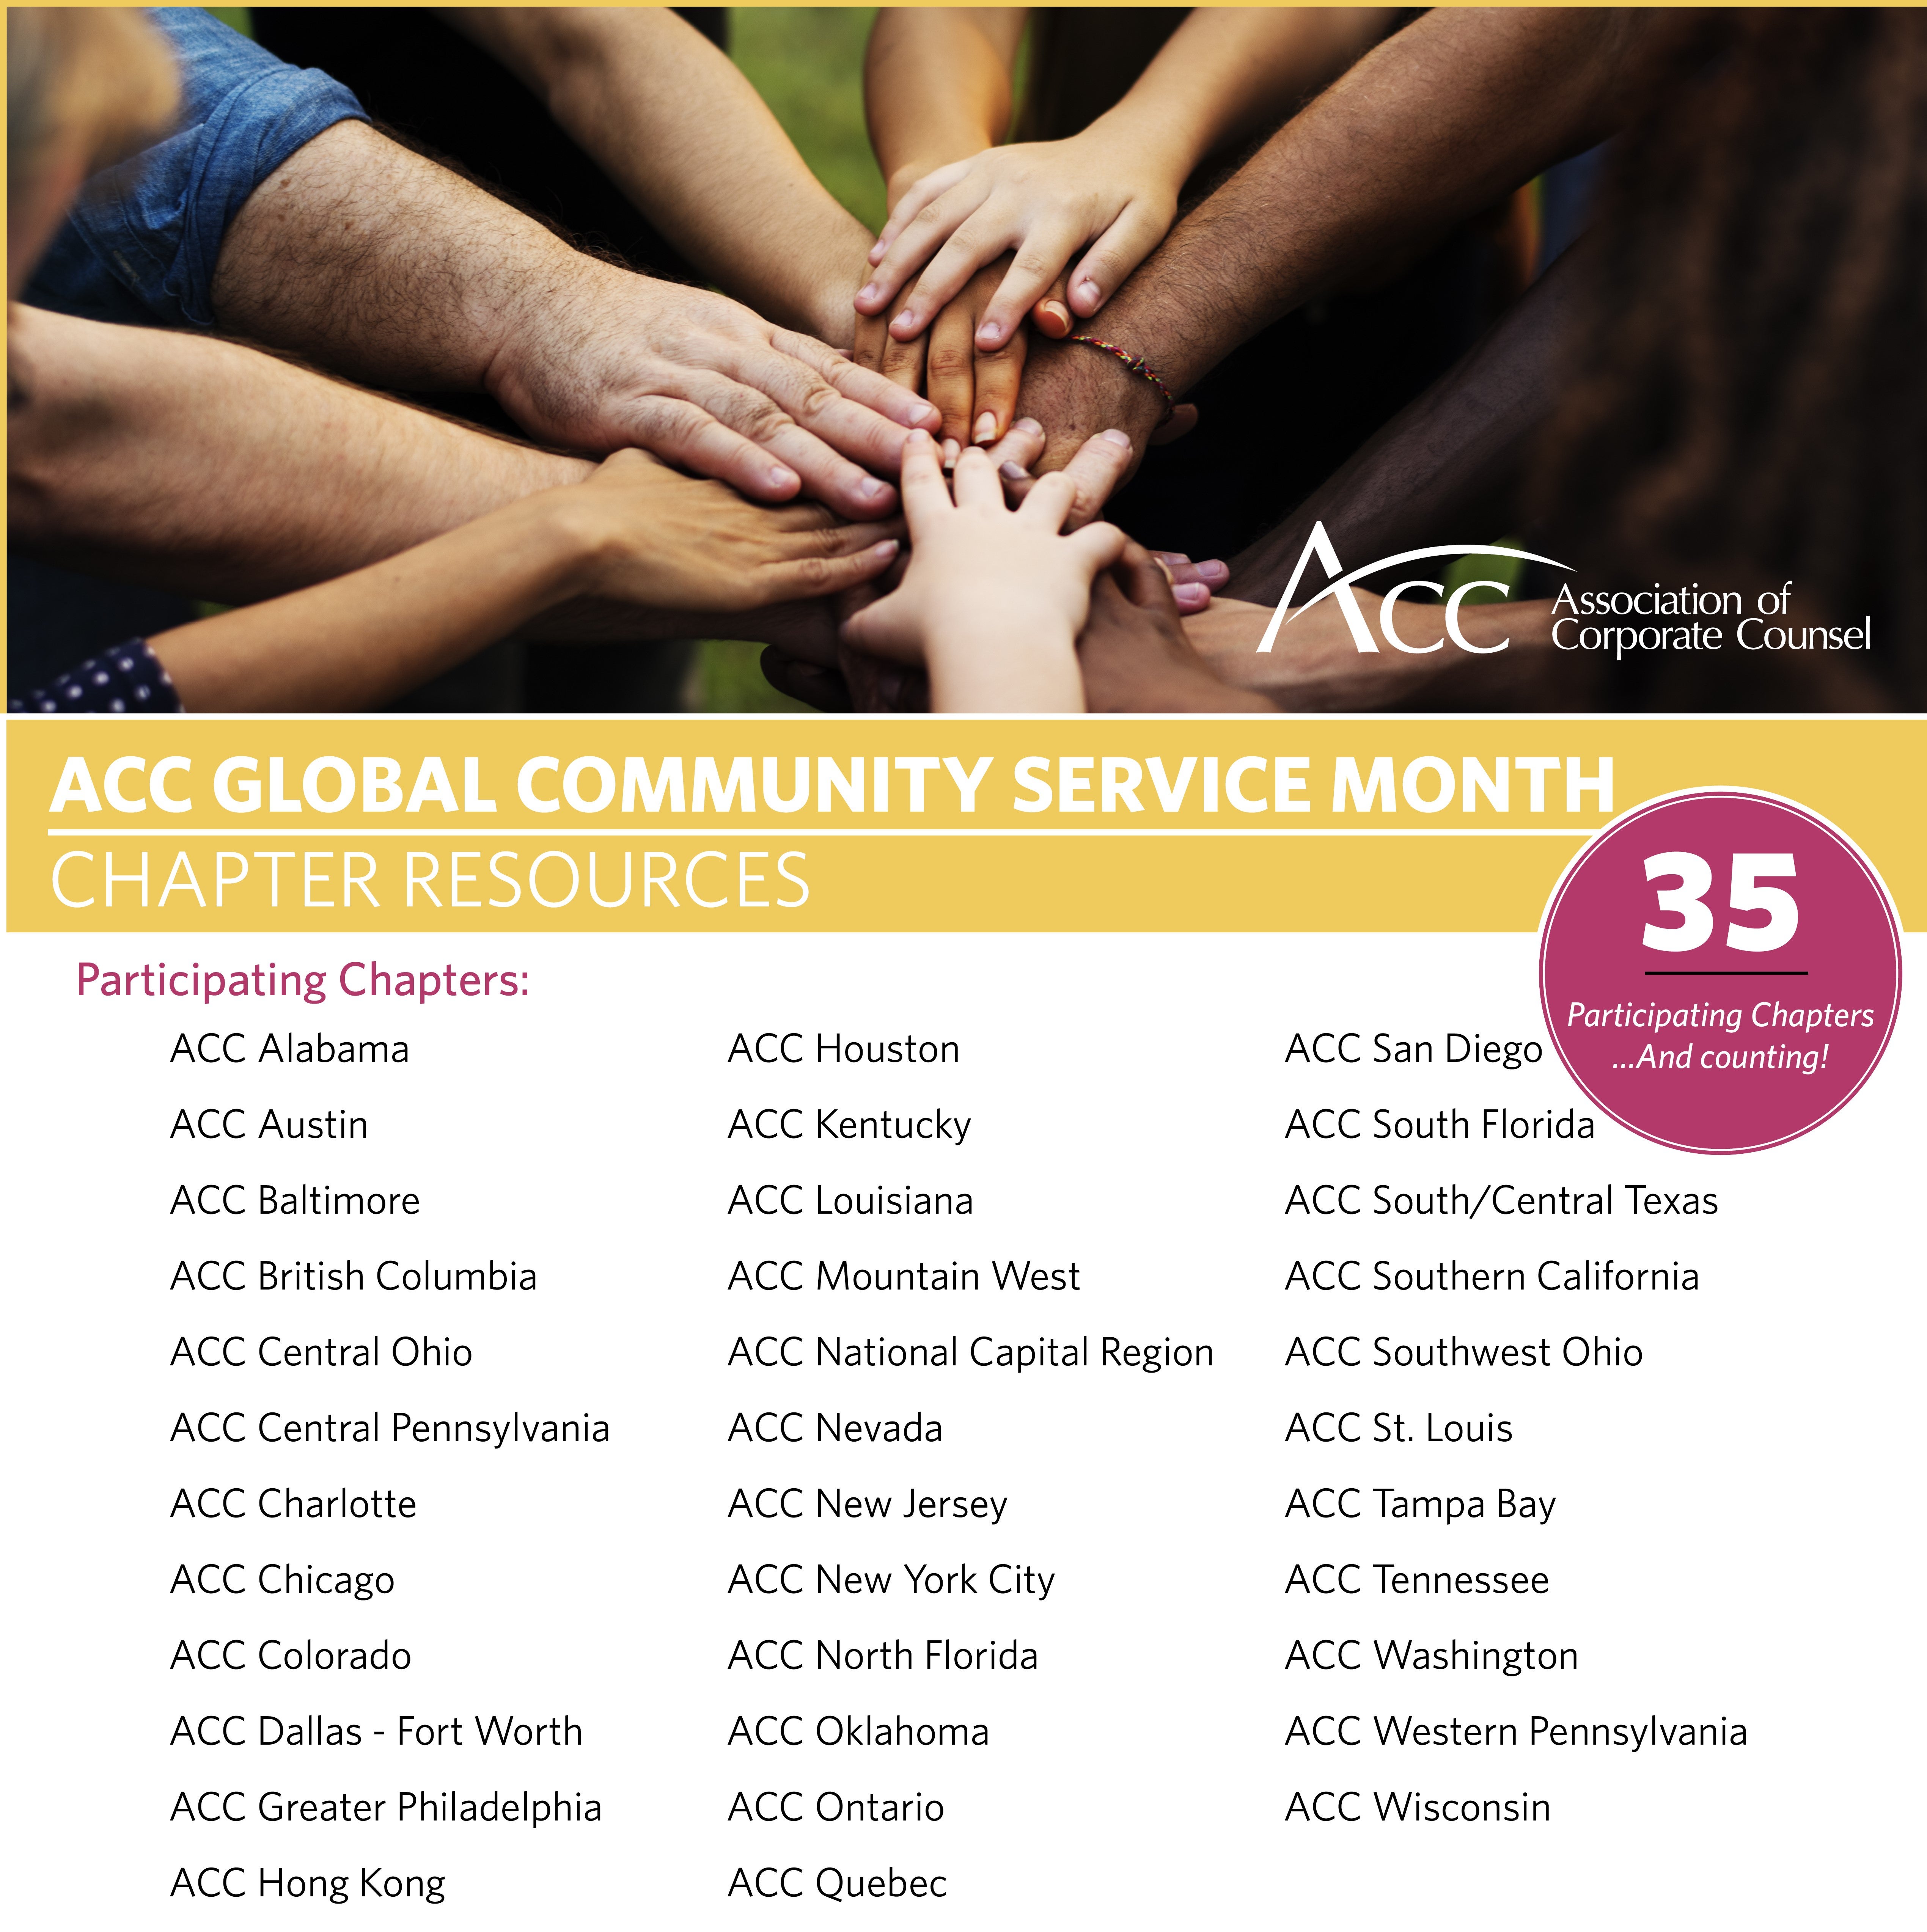 Global Community Service Month Association of Corporate Counsel (ACC)